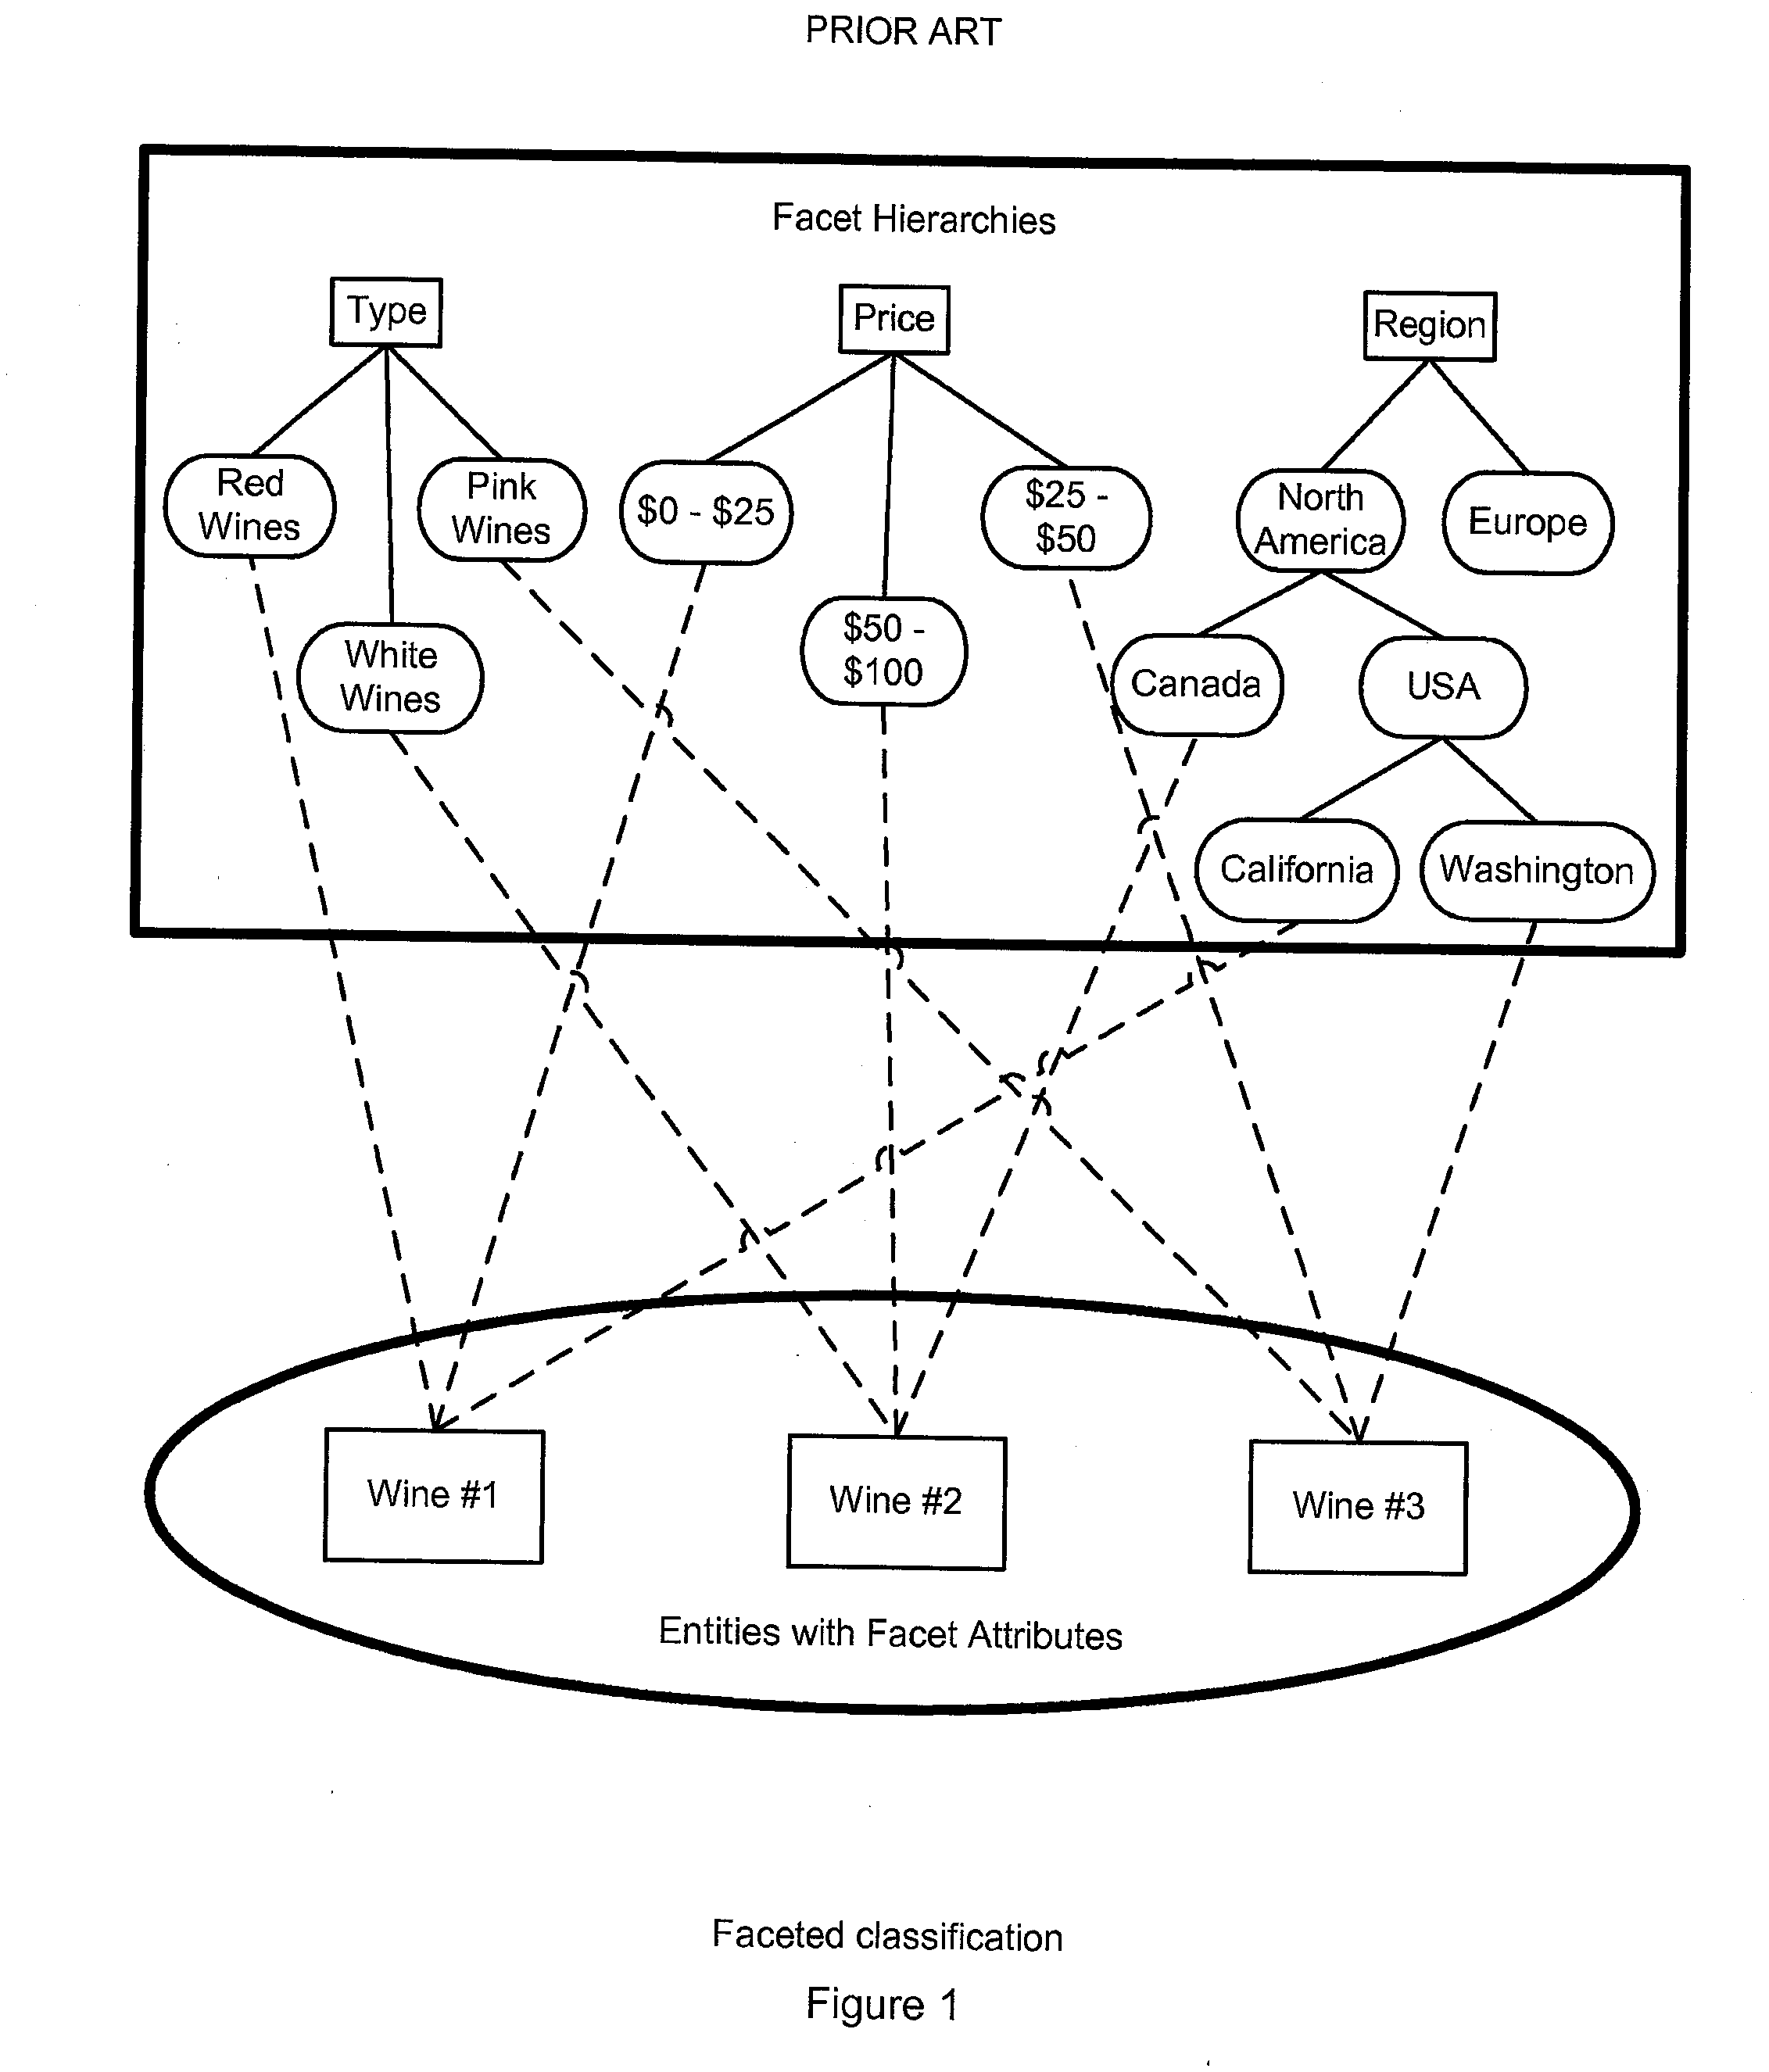 System, method and computer program for using a multi-tiered knowledge representation model